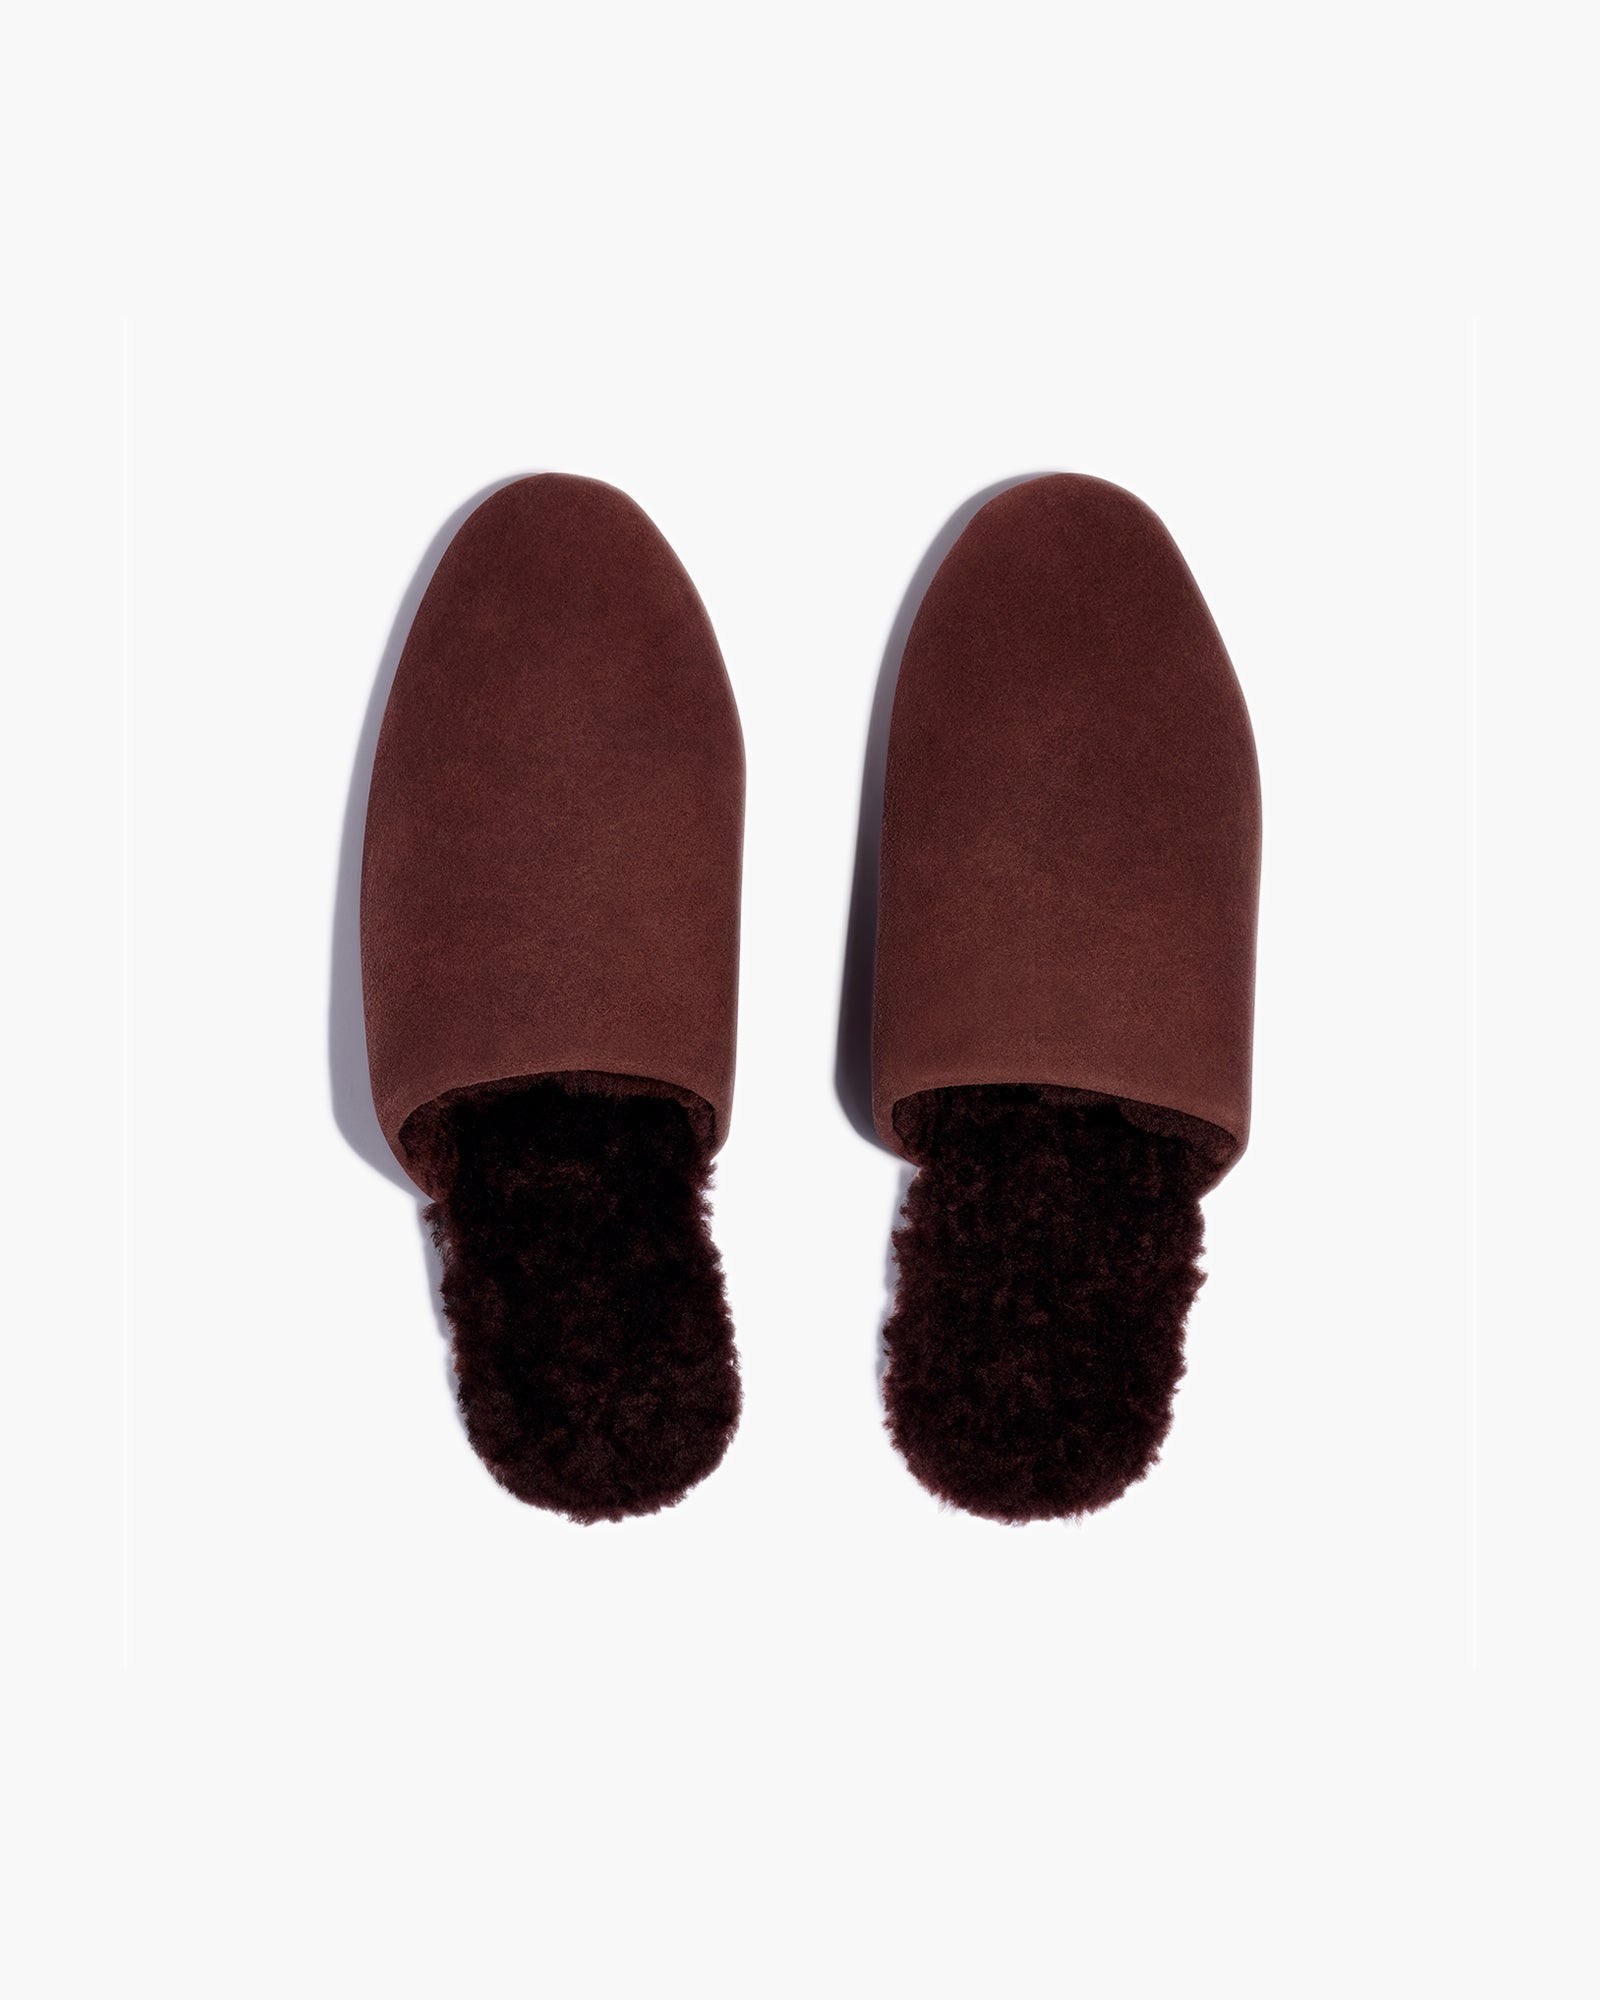 Chocolate Women\'s\'s\'s\'s\'s\'s\'s\'s\'s\'s\'s\'s\'s\'s\'s\'s\'s\'s\'s\'s\'s\'s TKEES Ines Shearling Slides | WLJYFA724